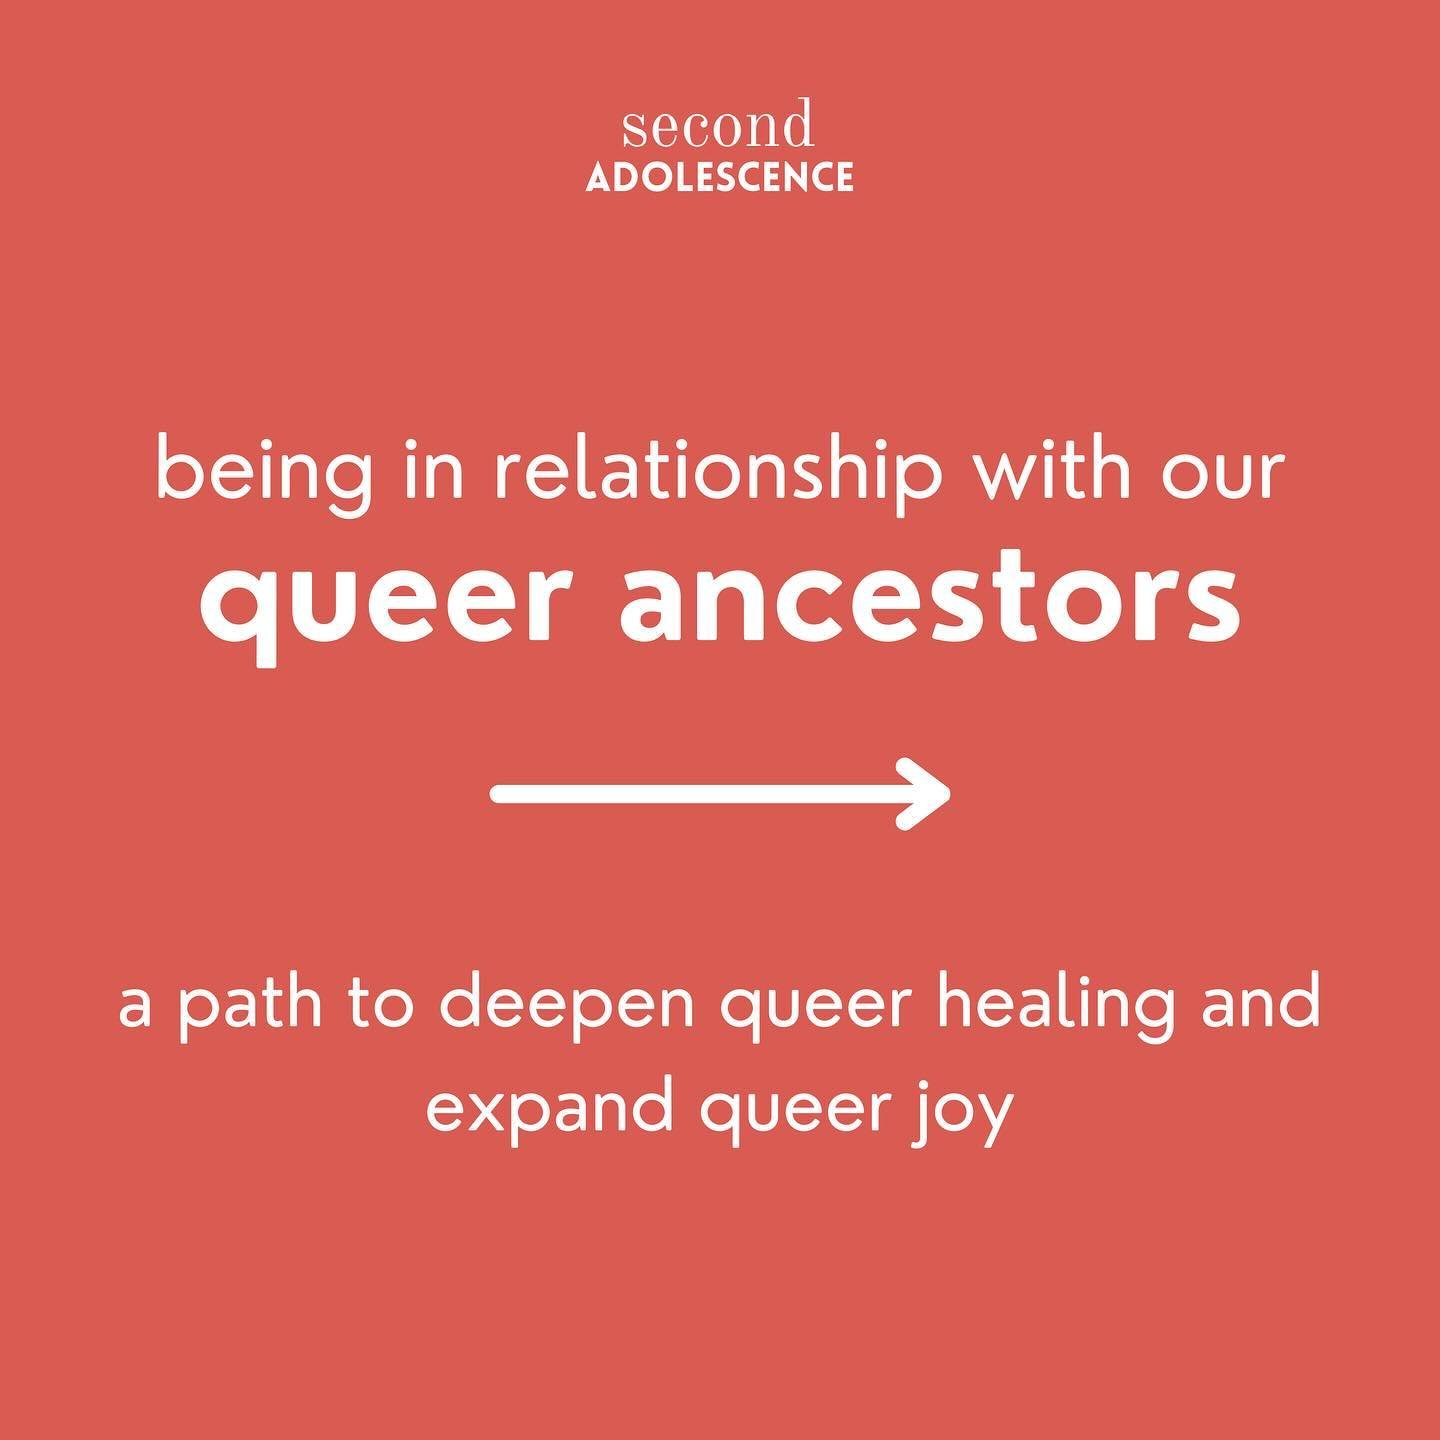 There is such profound power in finding ways to intentionally think about, feel for, and commune with our queer ancestors - all those who came before. 

In thought. In ritual. In reading their stories. In learning about their lives. In wondering abou